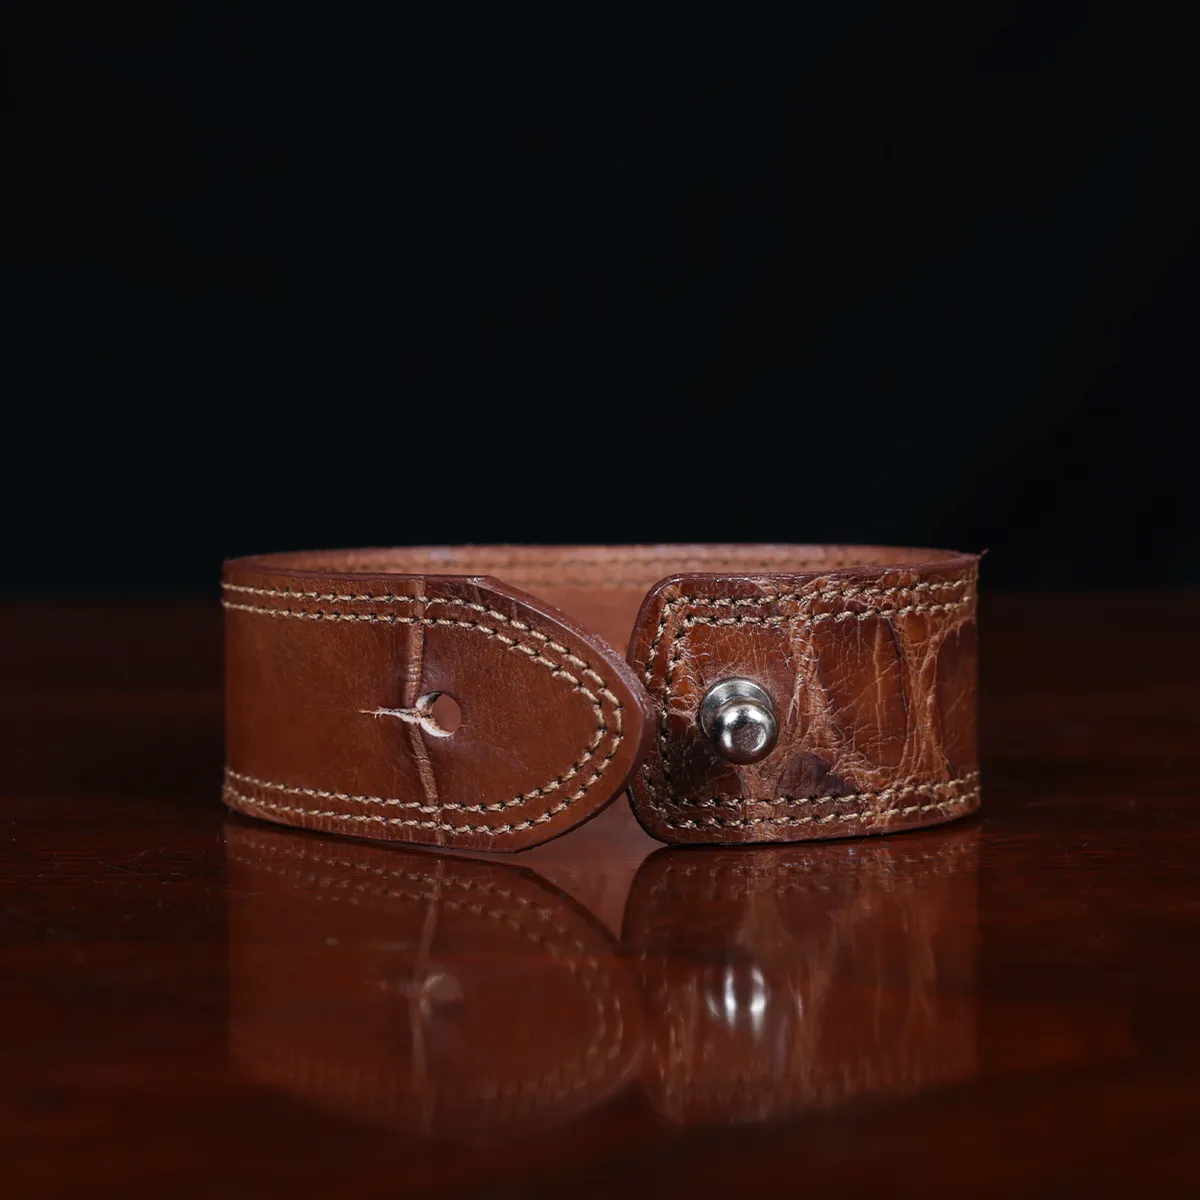 cuff-bracelet-alligator-no28-clasp view- on a wooden table with a dark background